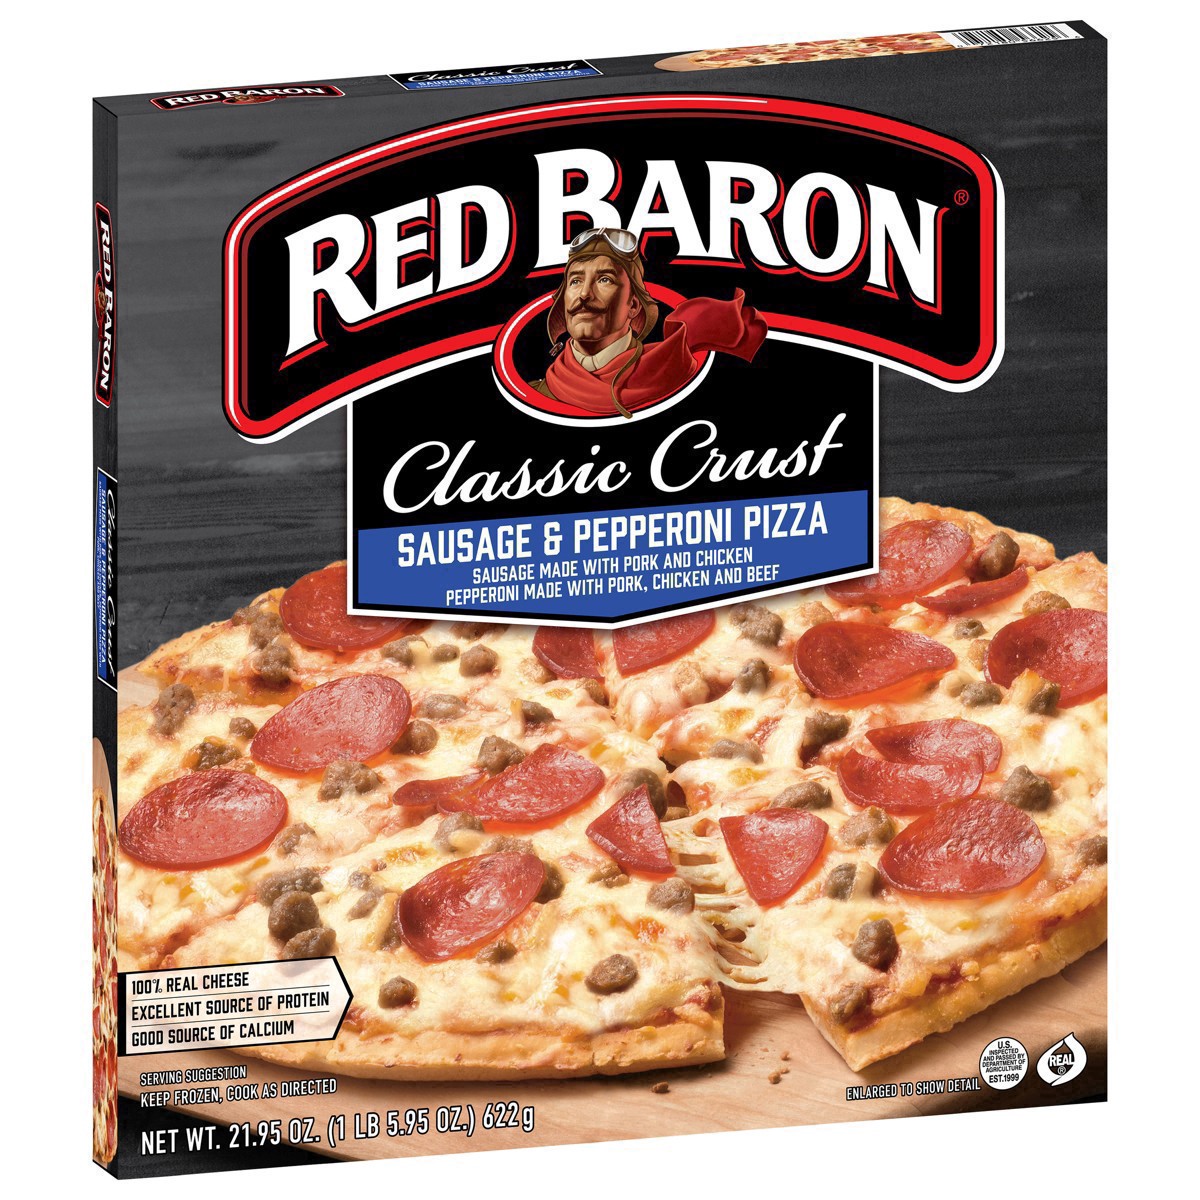 slide 11 of 49, Red Baron Frozen Pizza Classic Crust Sausage & Pepperoni, 21.95 oz